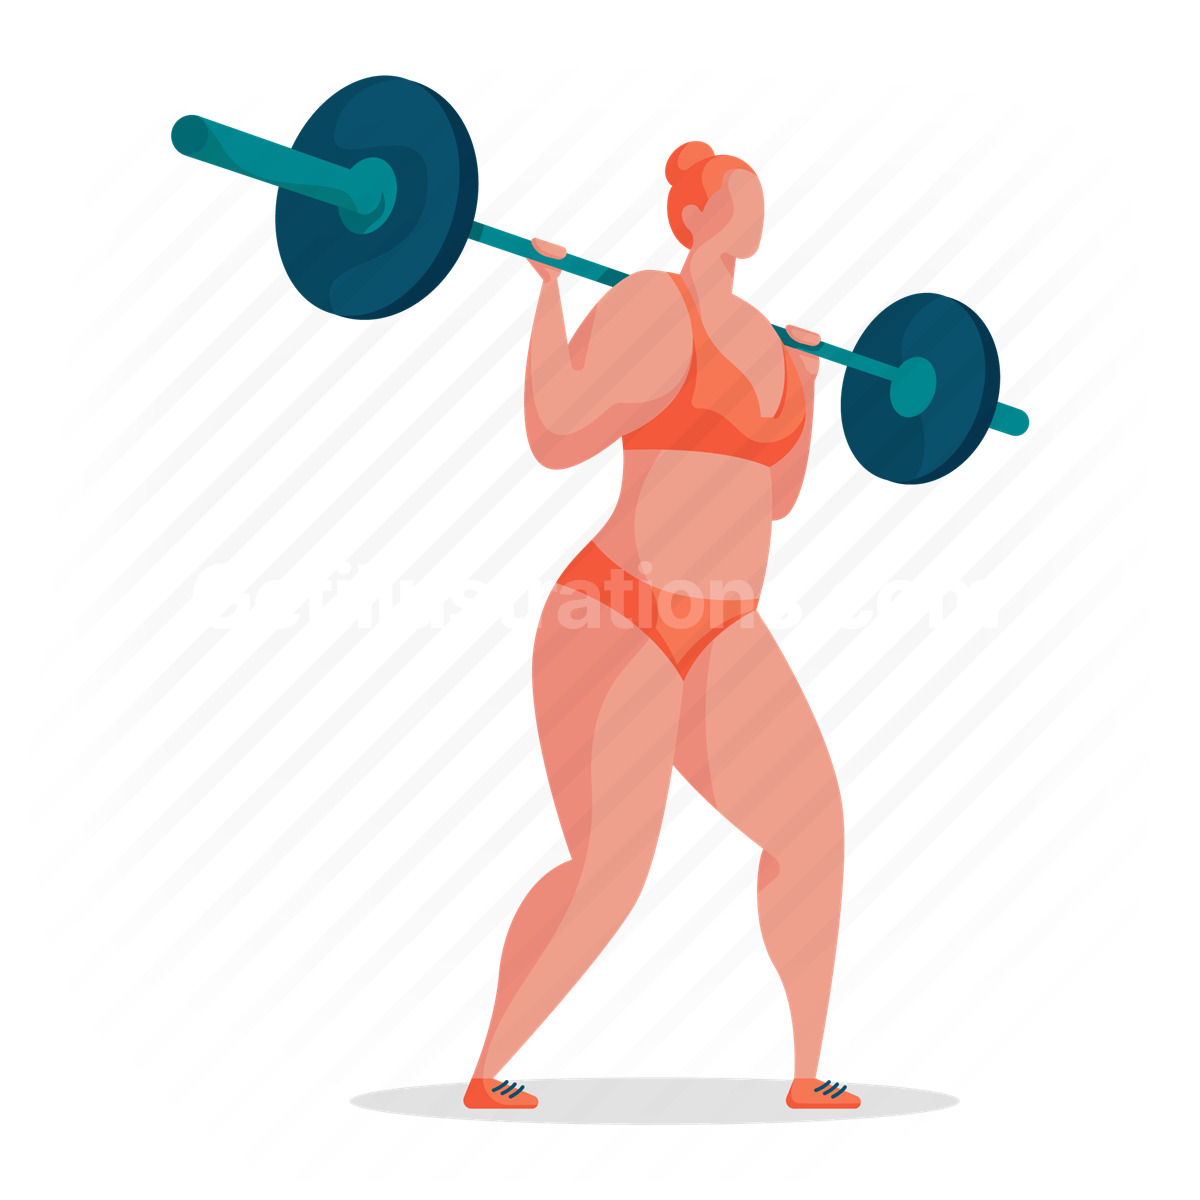 woman, weight lifting, gym, fitness